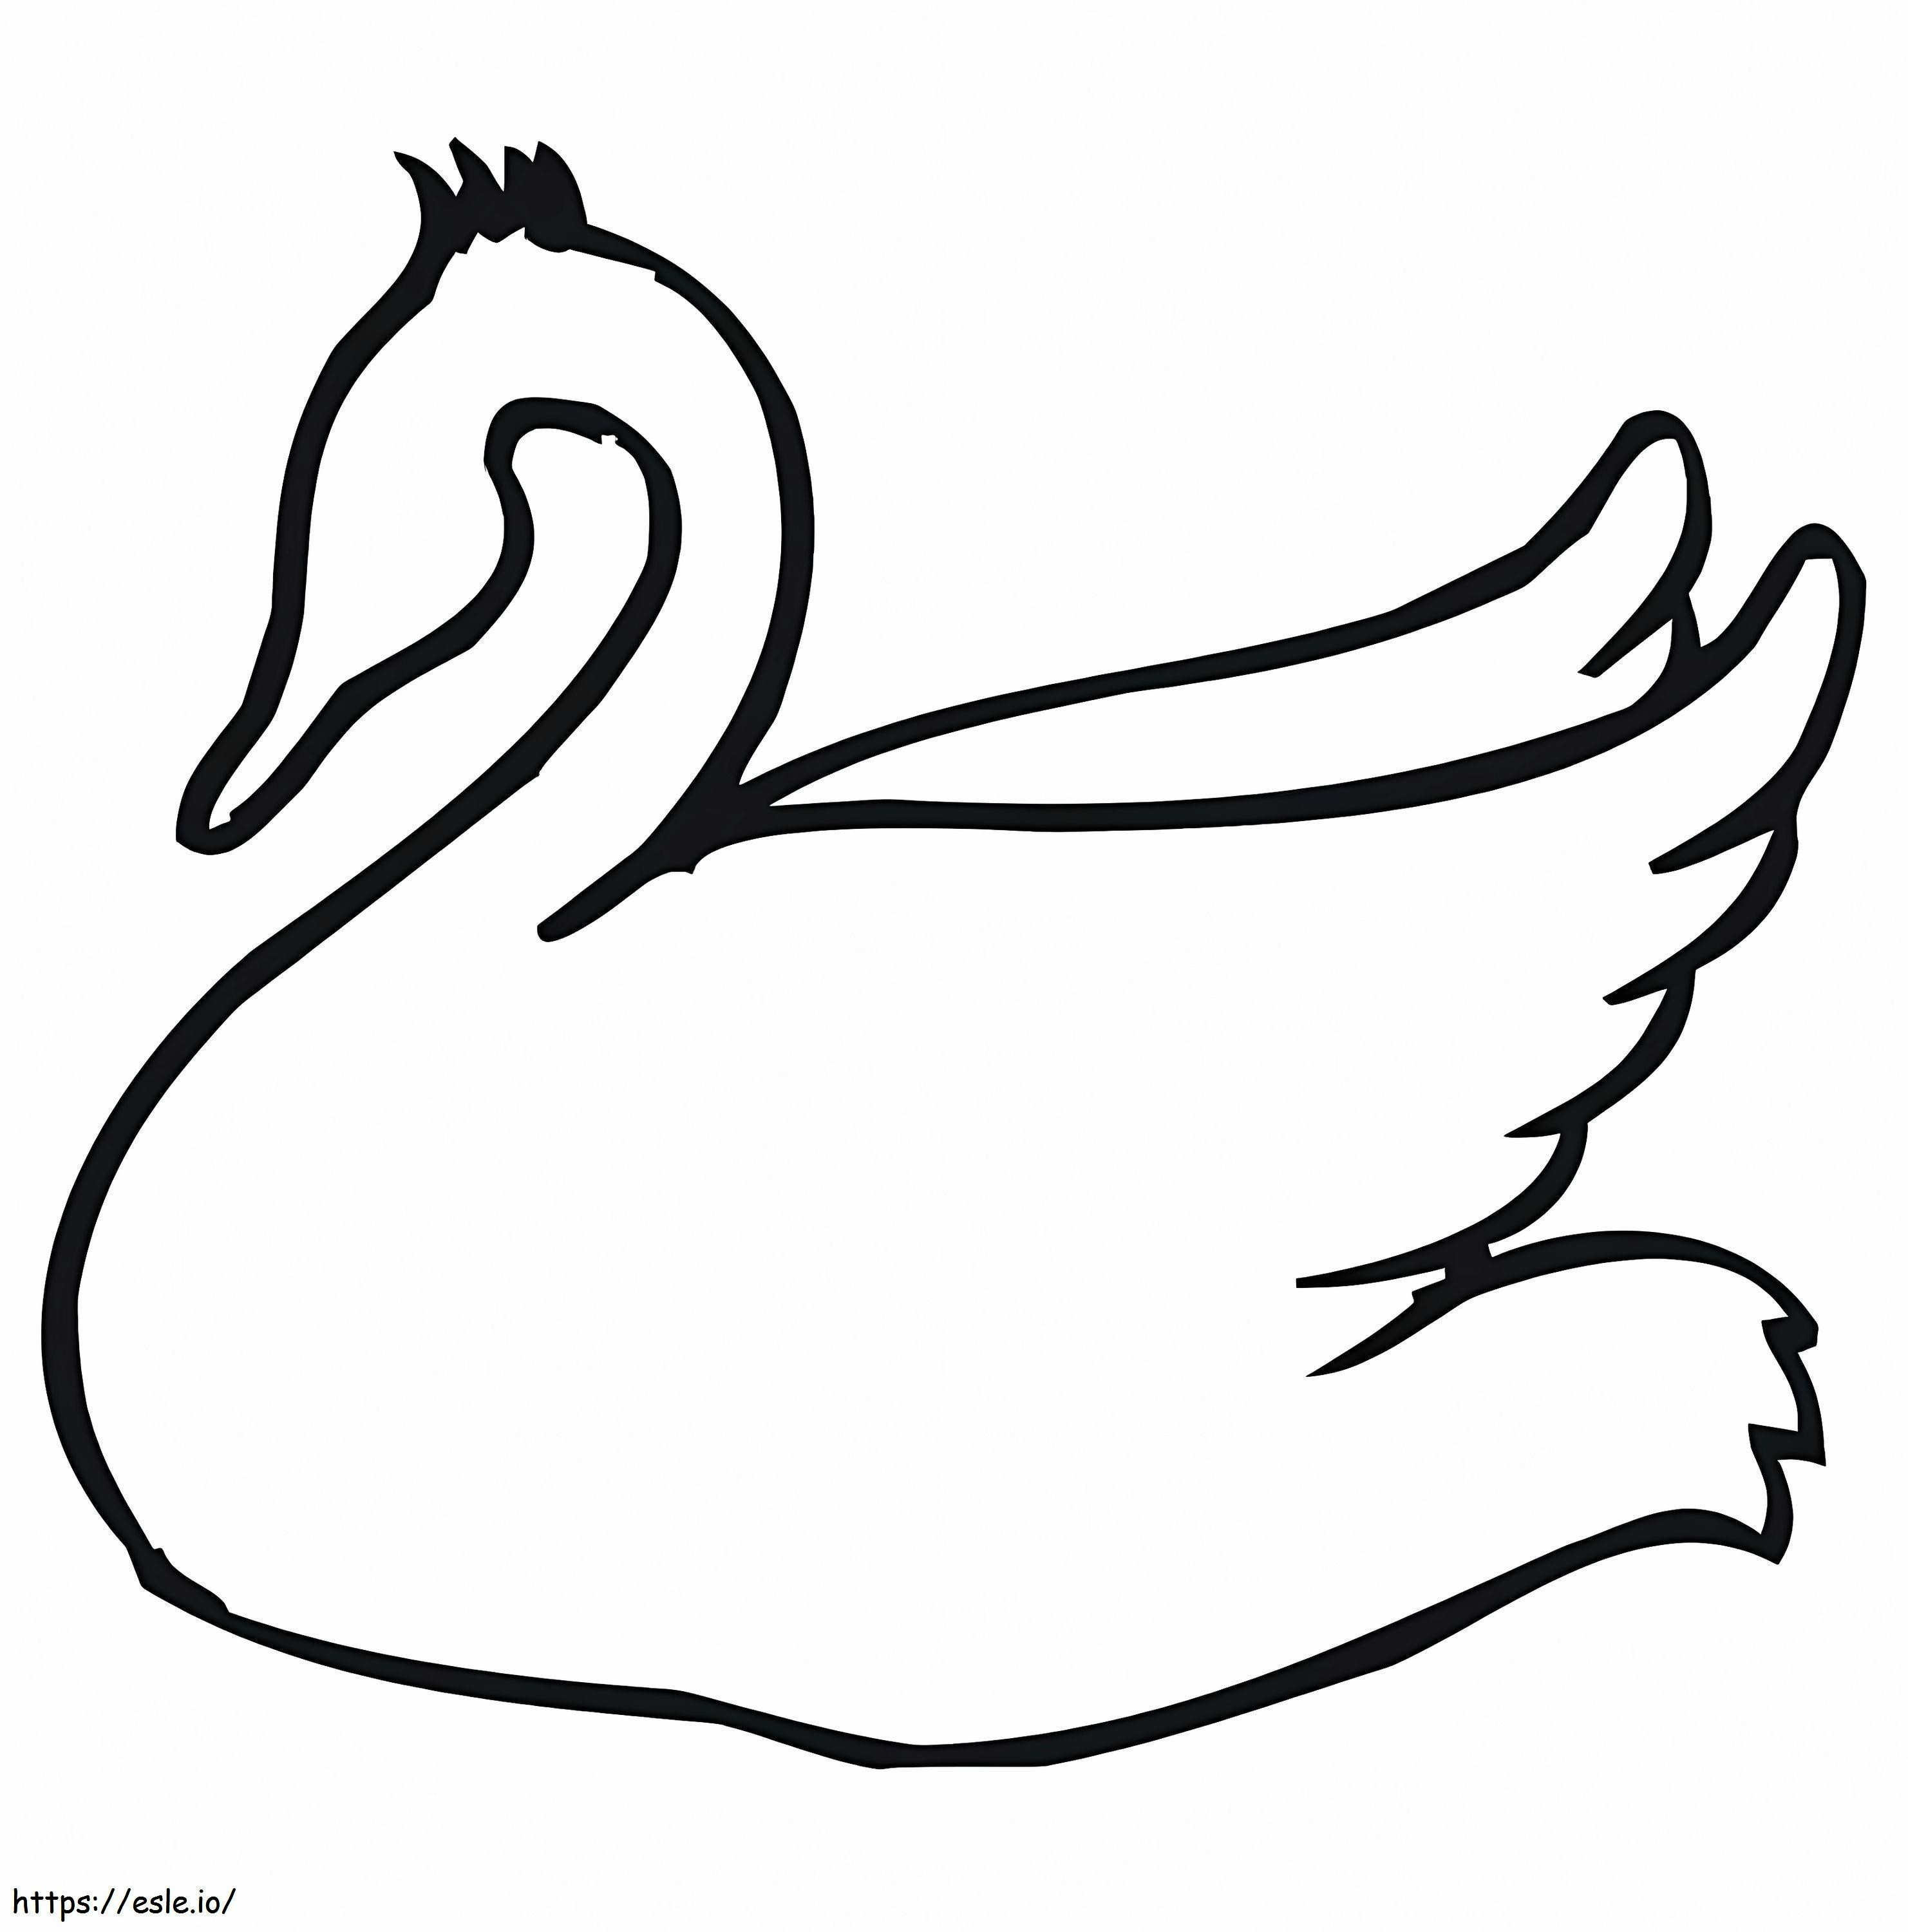 Swan Scheme coloring page